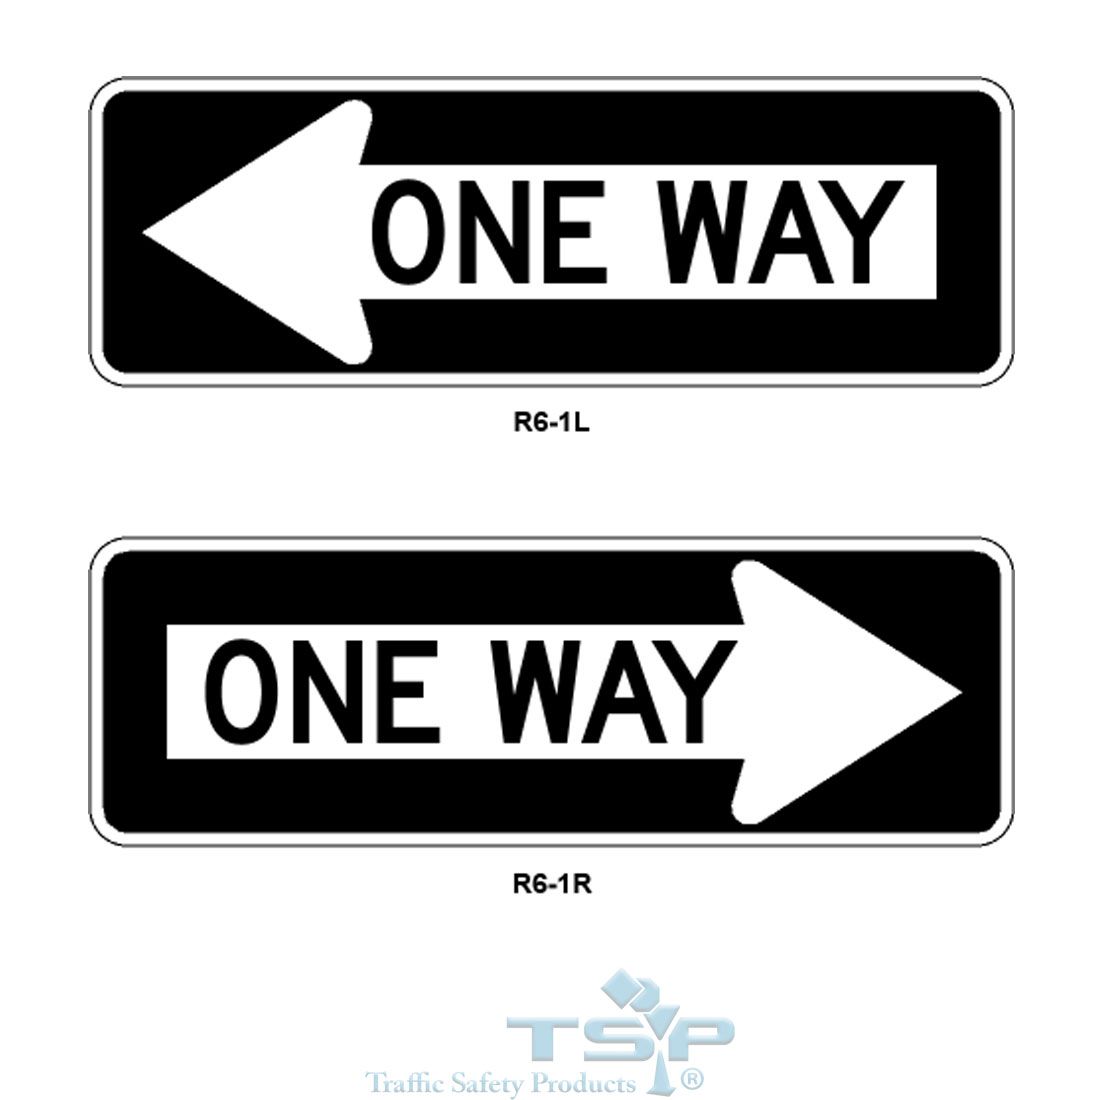 R6-1 (R/L), One Way Signs, Various Sizes and Reflectives